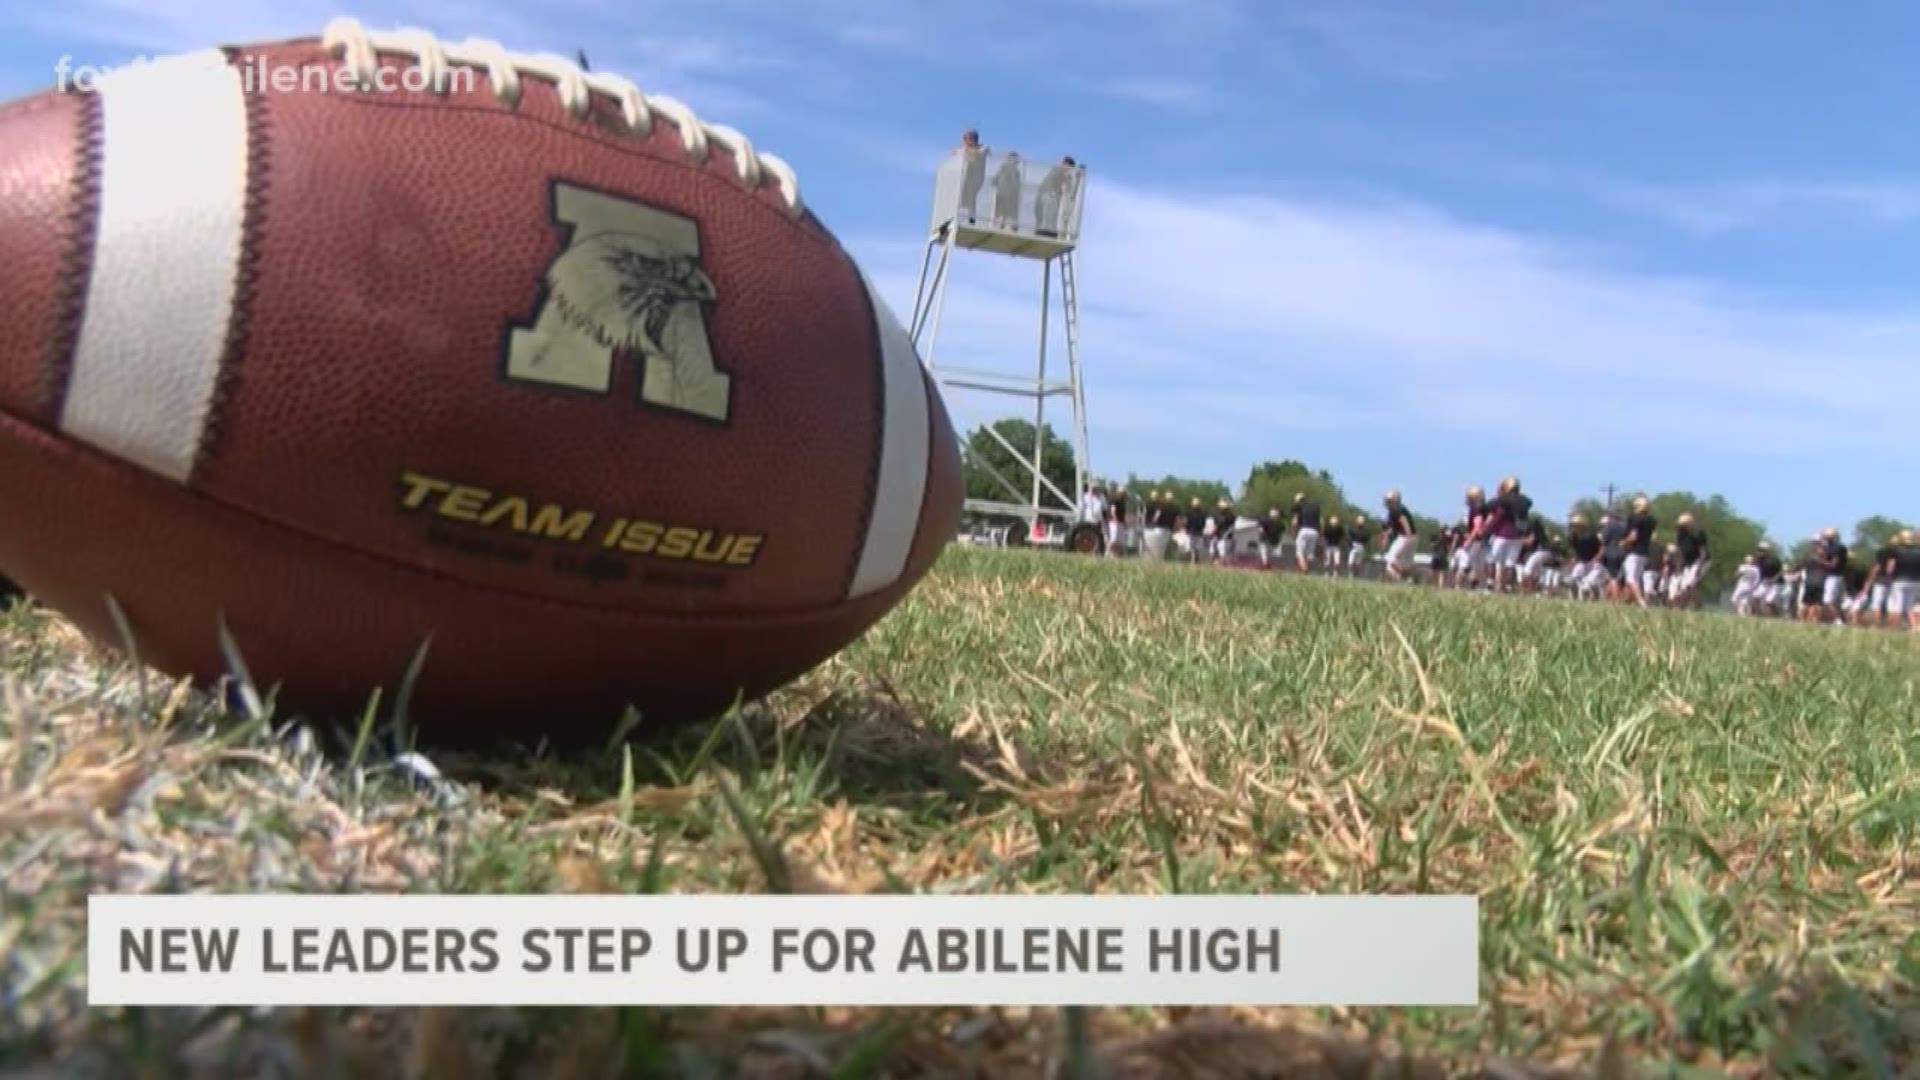 Not only did Abilene High graduate a lot of talent, the Eagles lost a handful of key leadership figures. Some new faces are fitting into the role as leaders and they're making a good early impression.